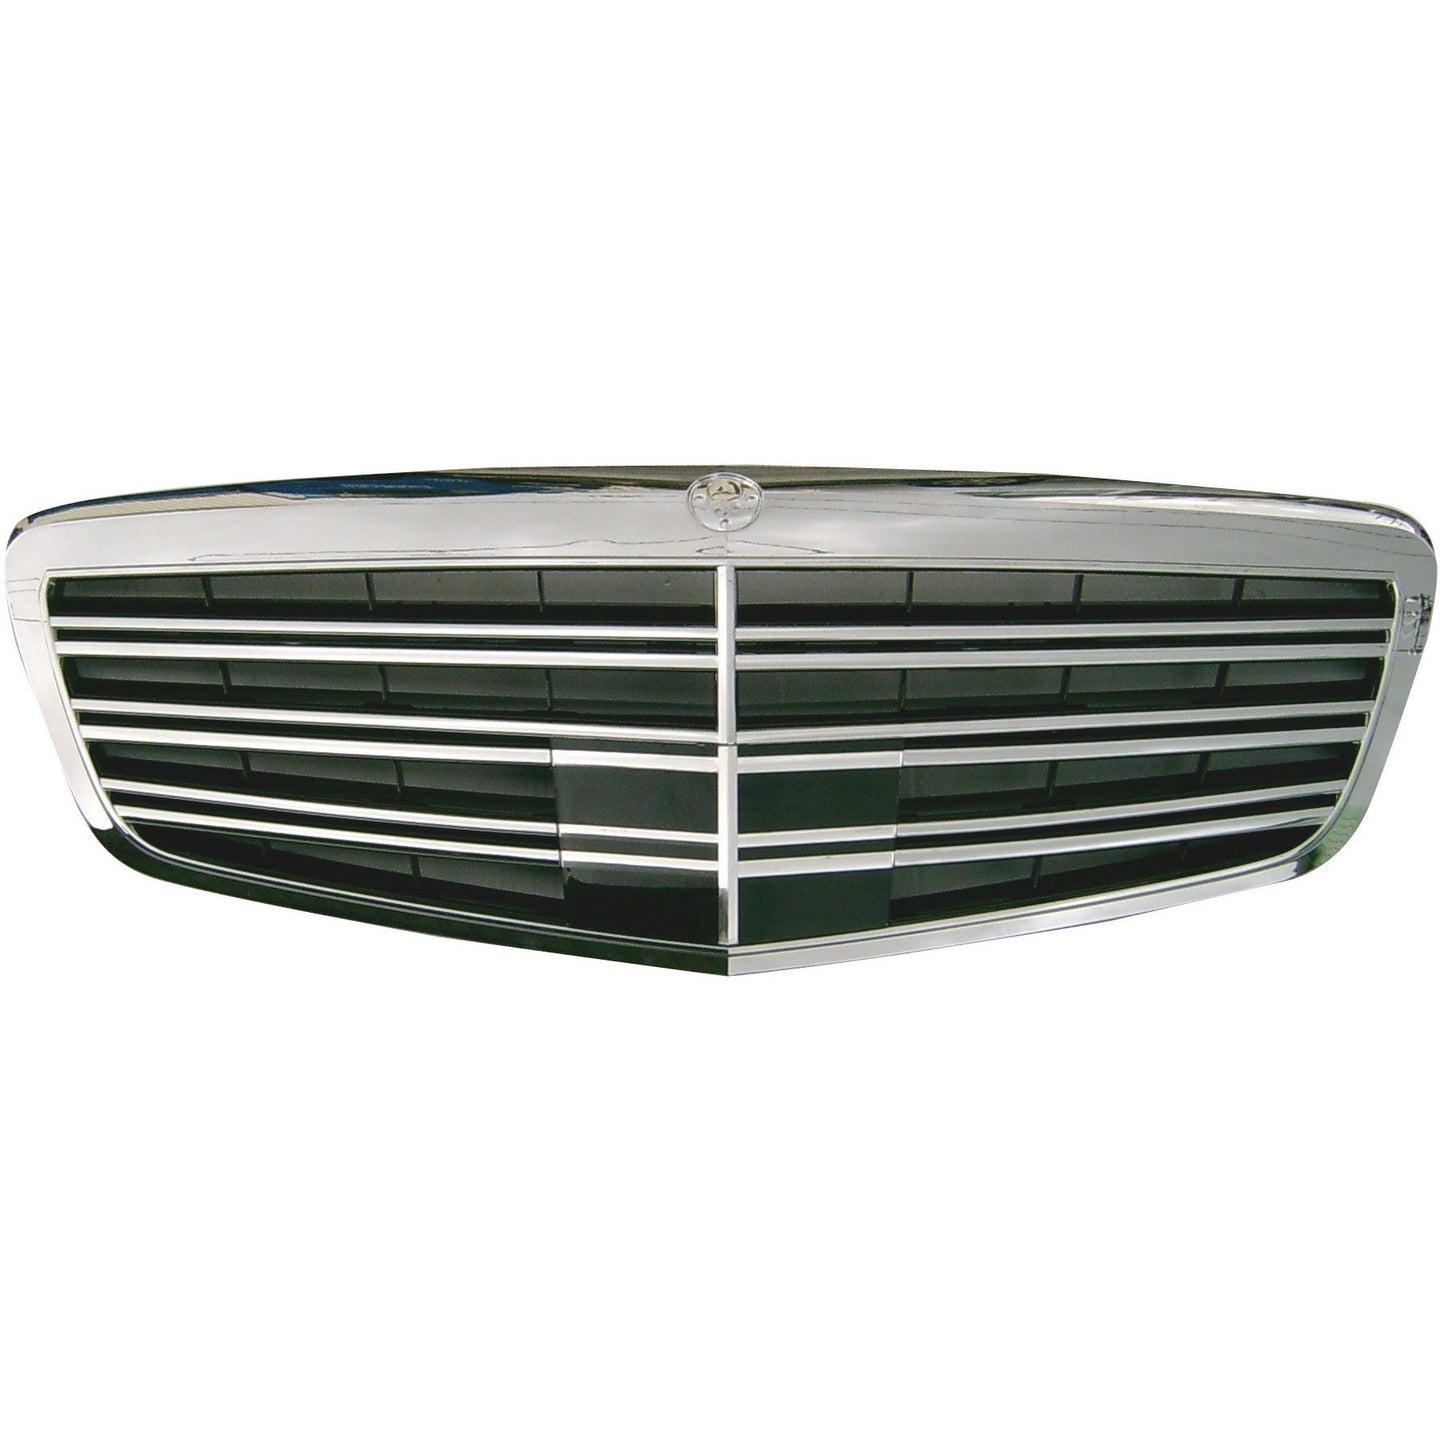 w221 2010 front grille